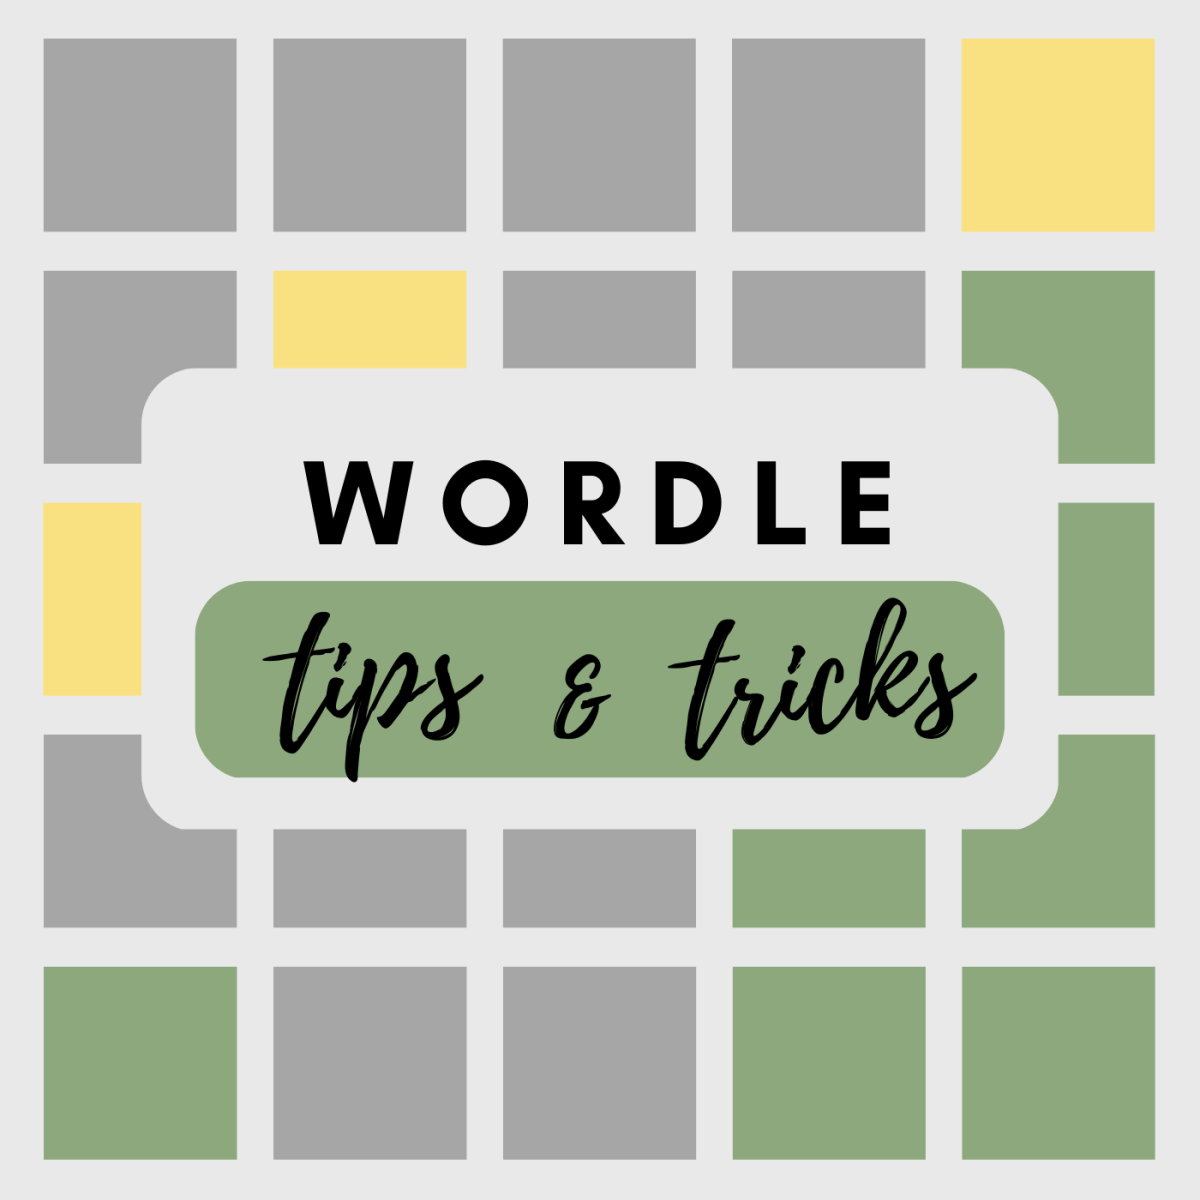 How to play Wordle